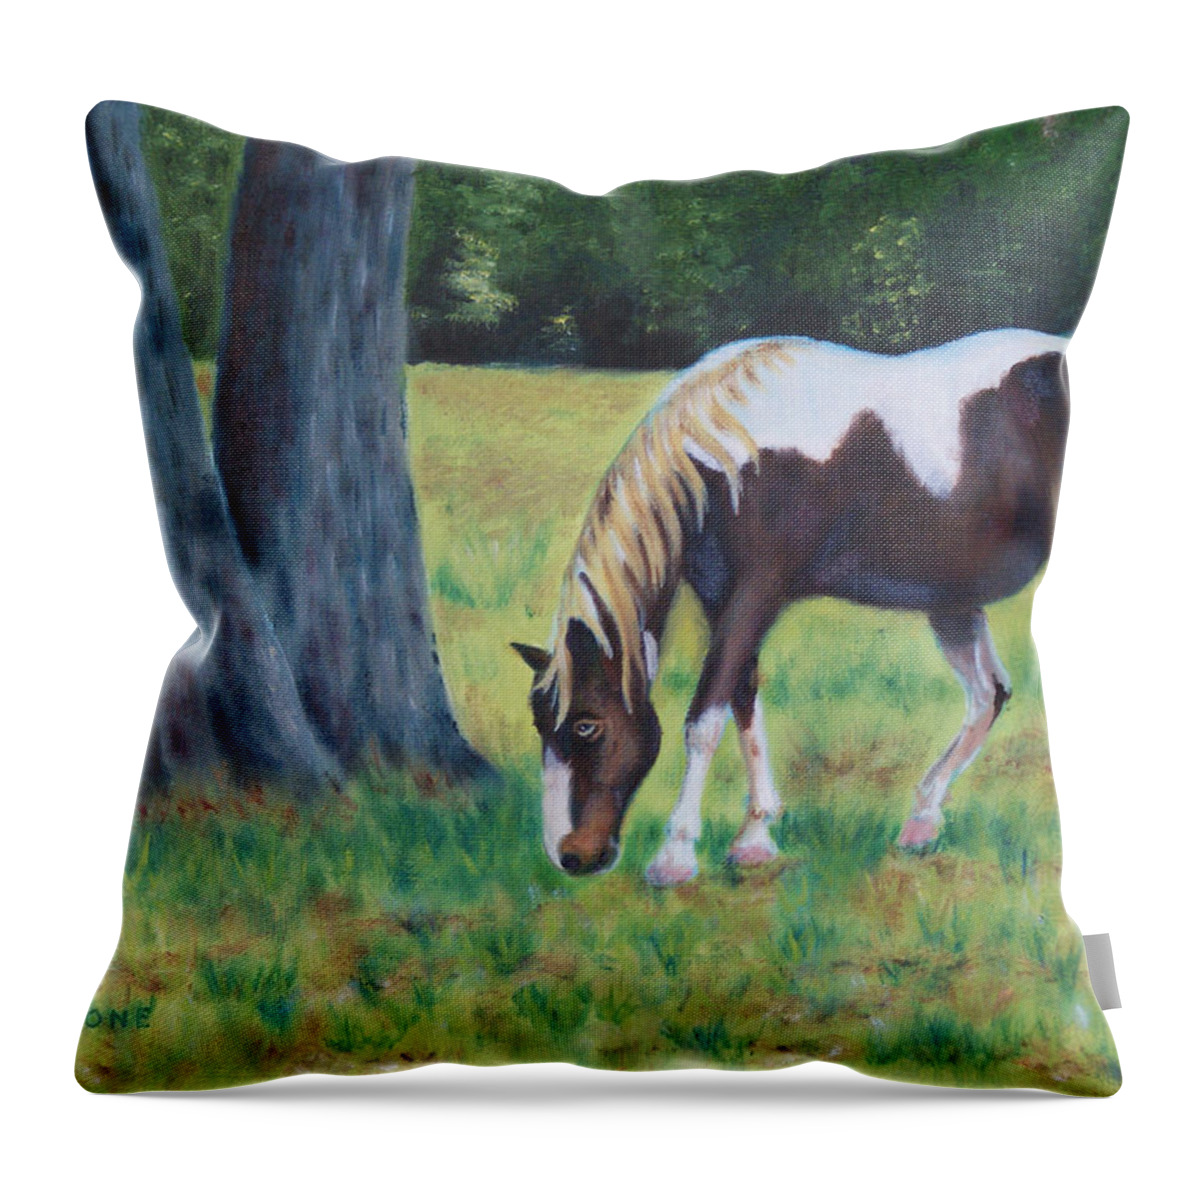 Horse Throw Pillow featuring the painting Painted Pony by Jill Ciccone Pike